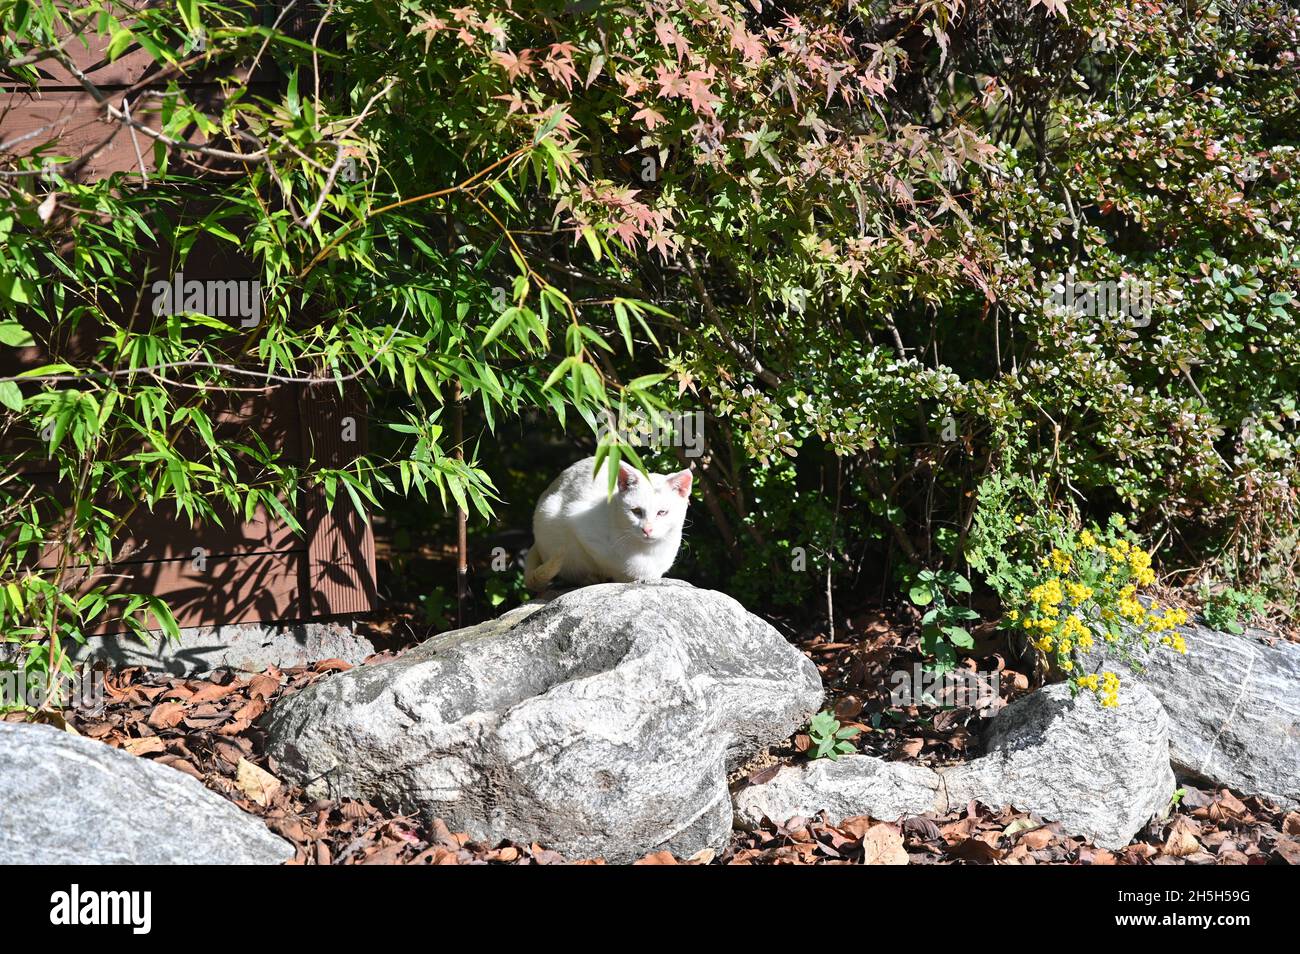 A street cat crouched on the rock and is wary, but it is so cute. Stock Photo